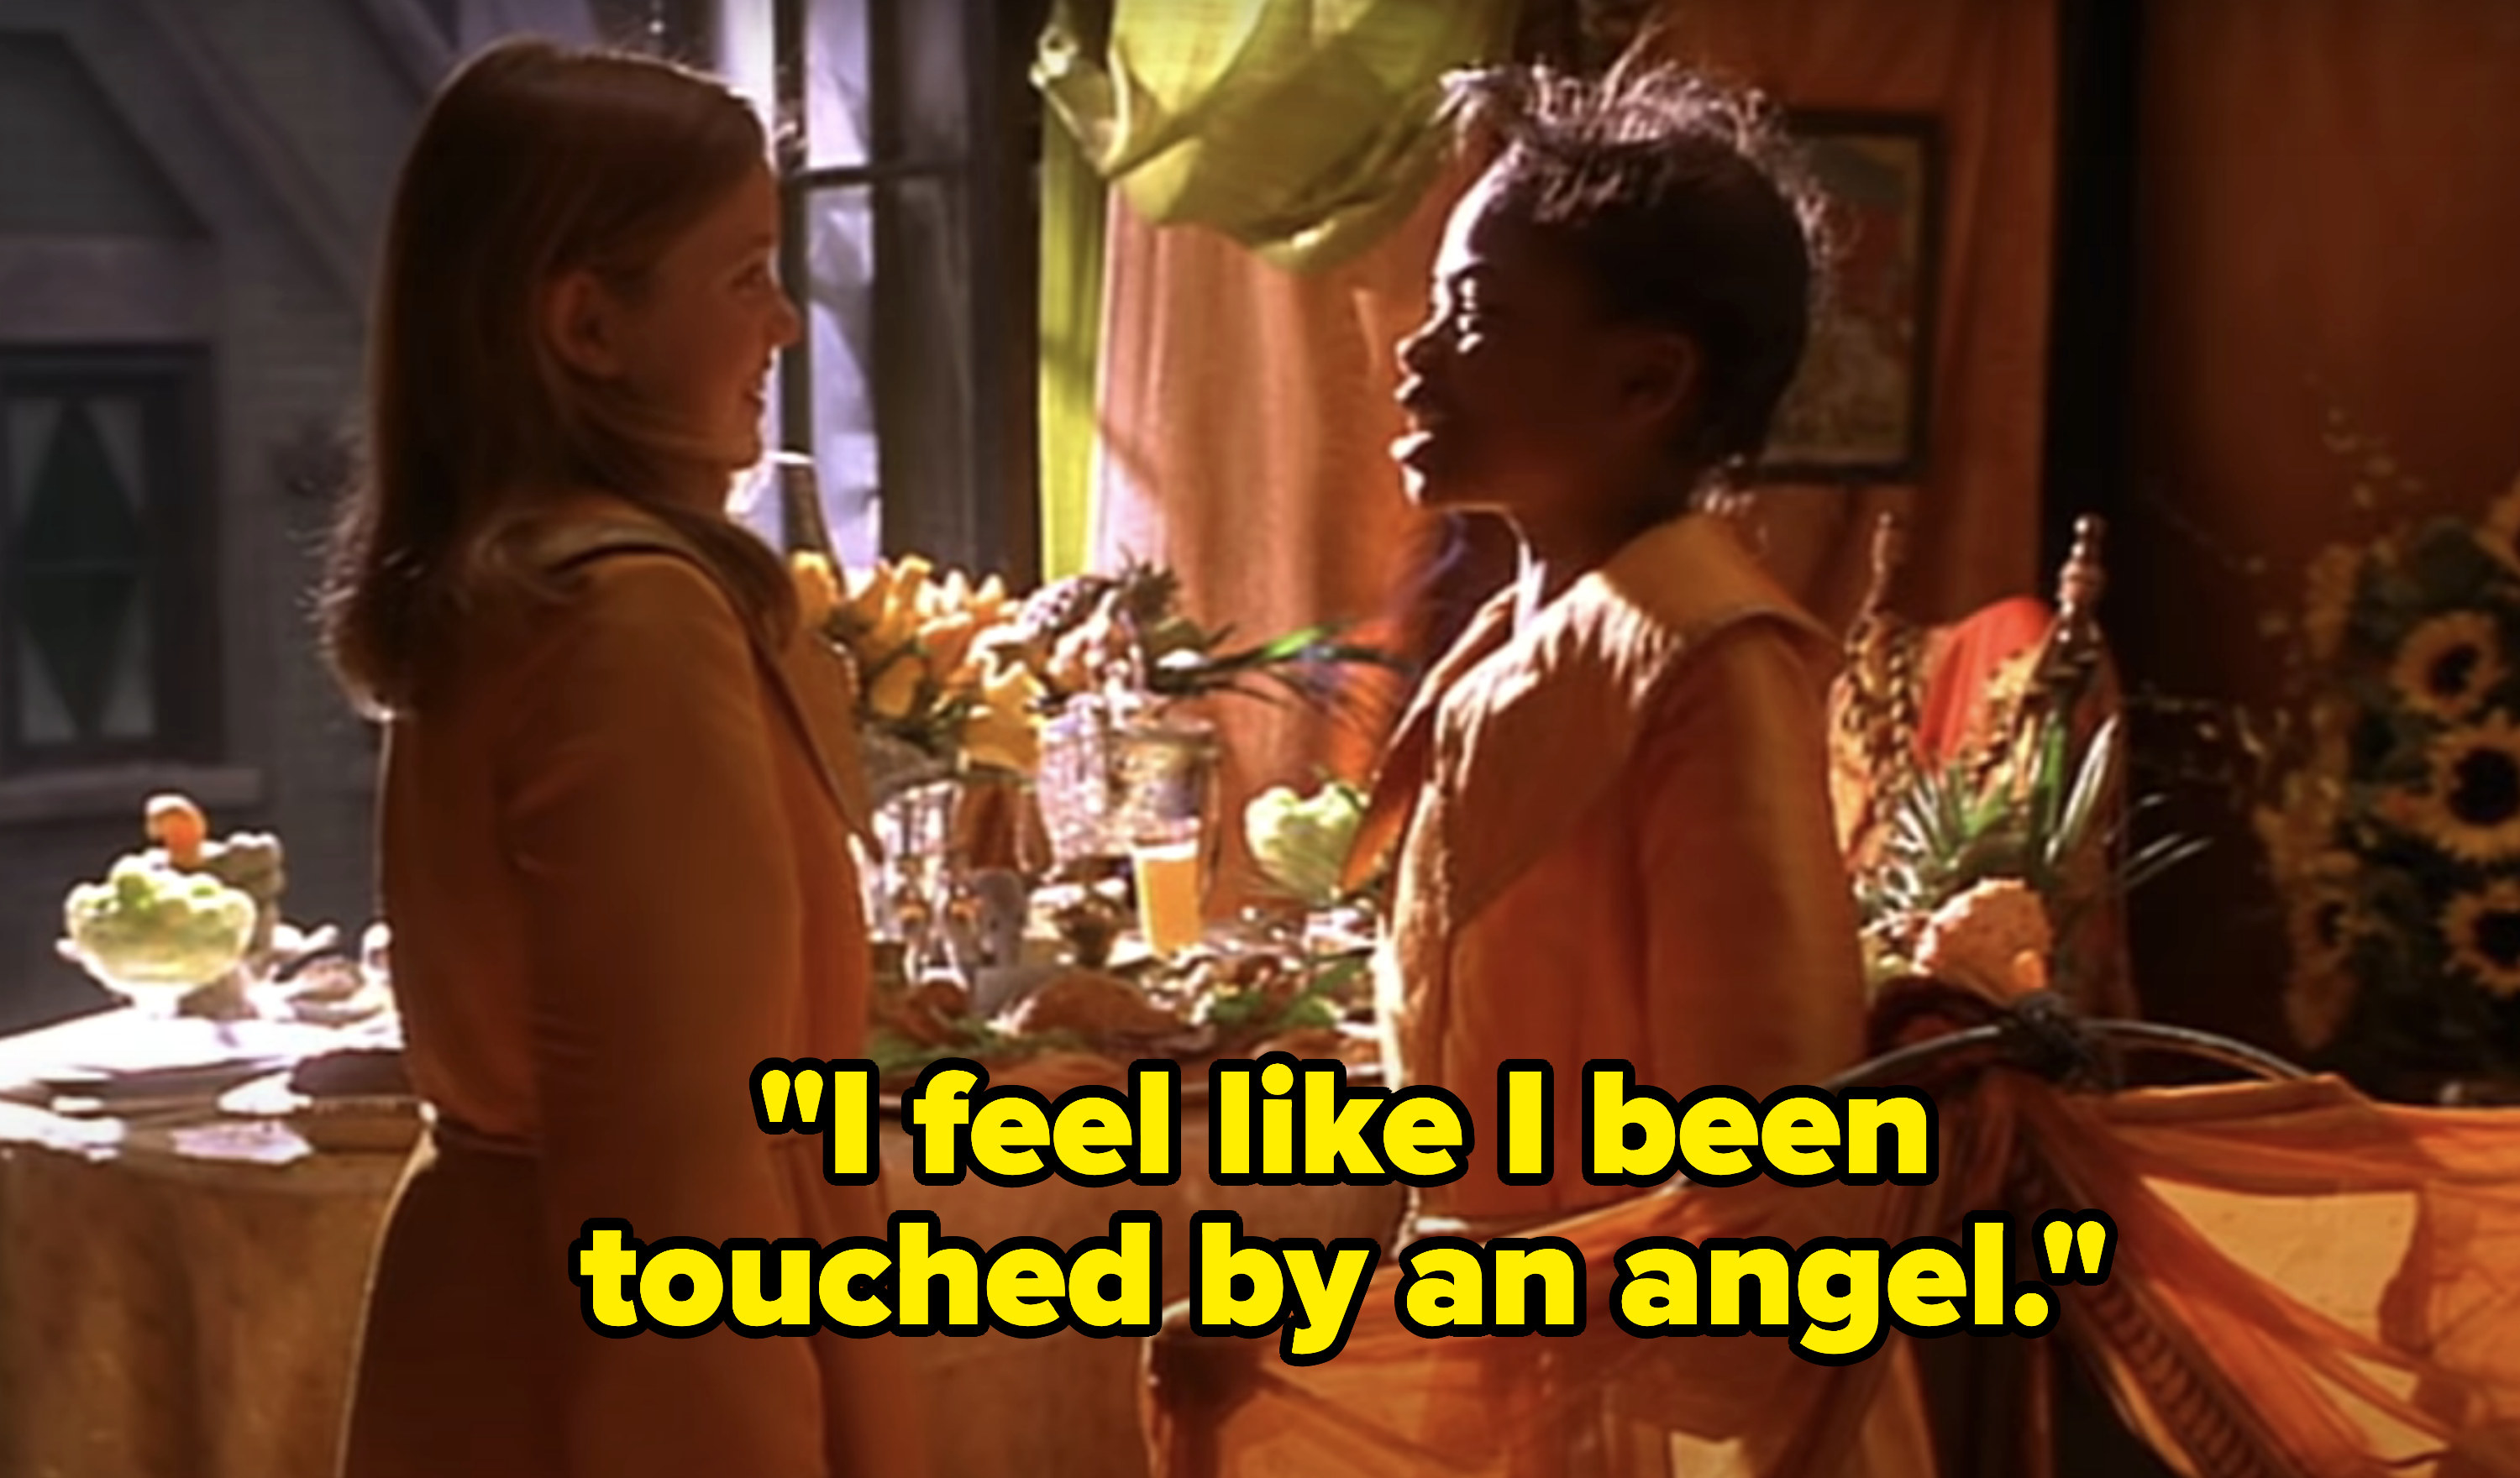 Girl says, &quot;I feel like I been touched by an angel&quot;